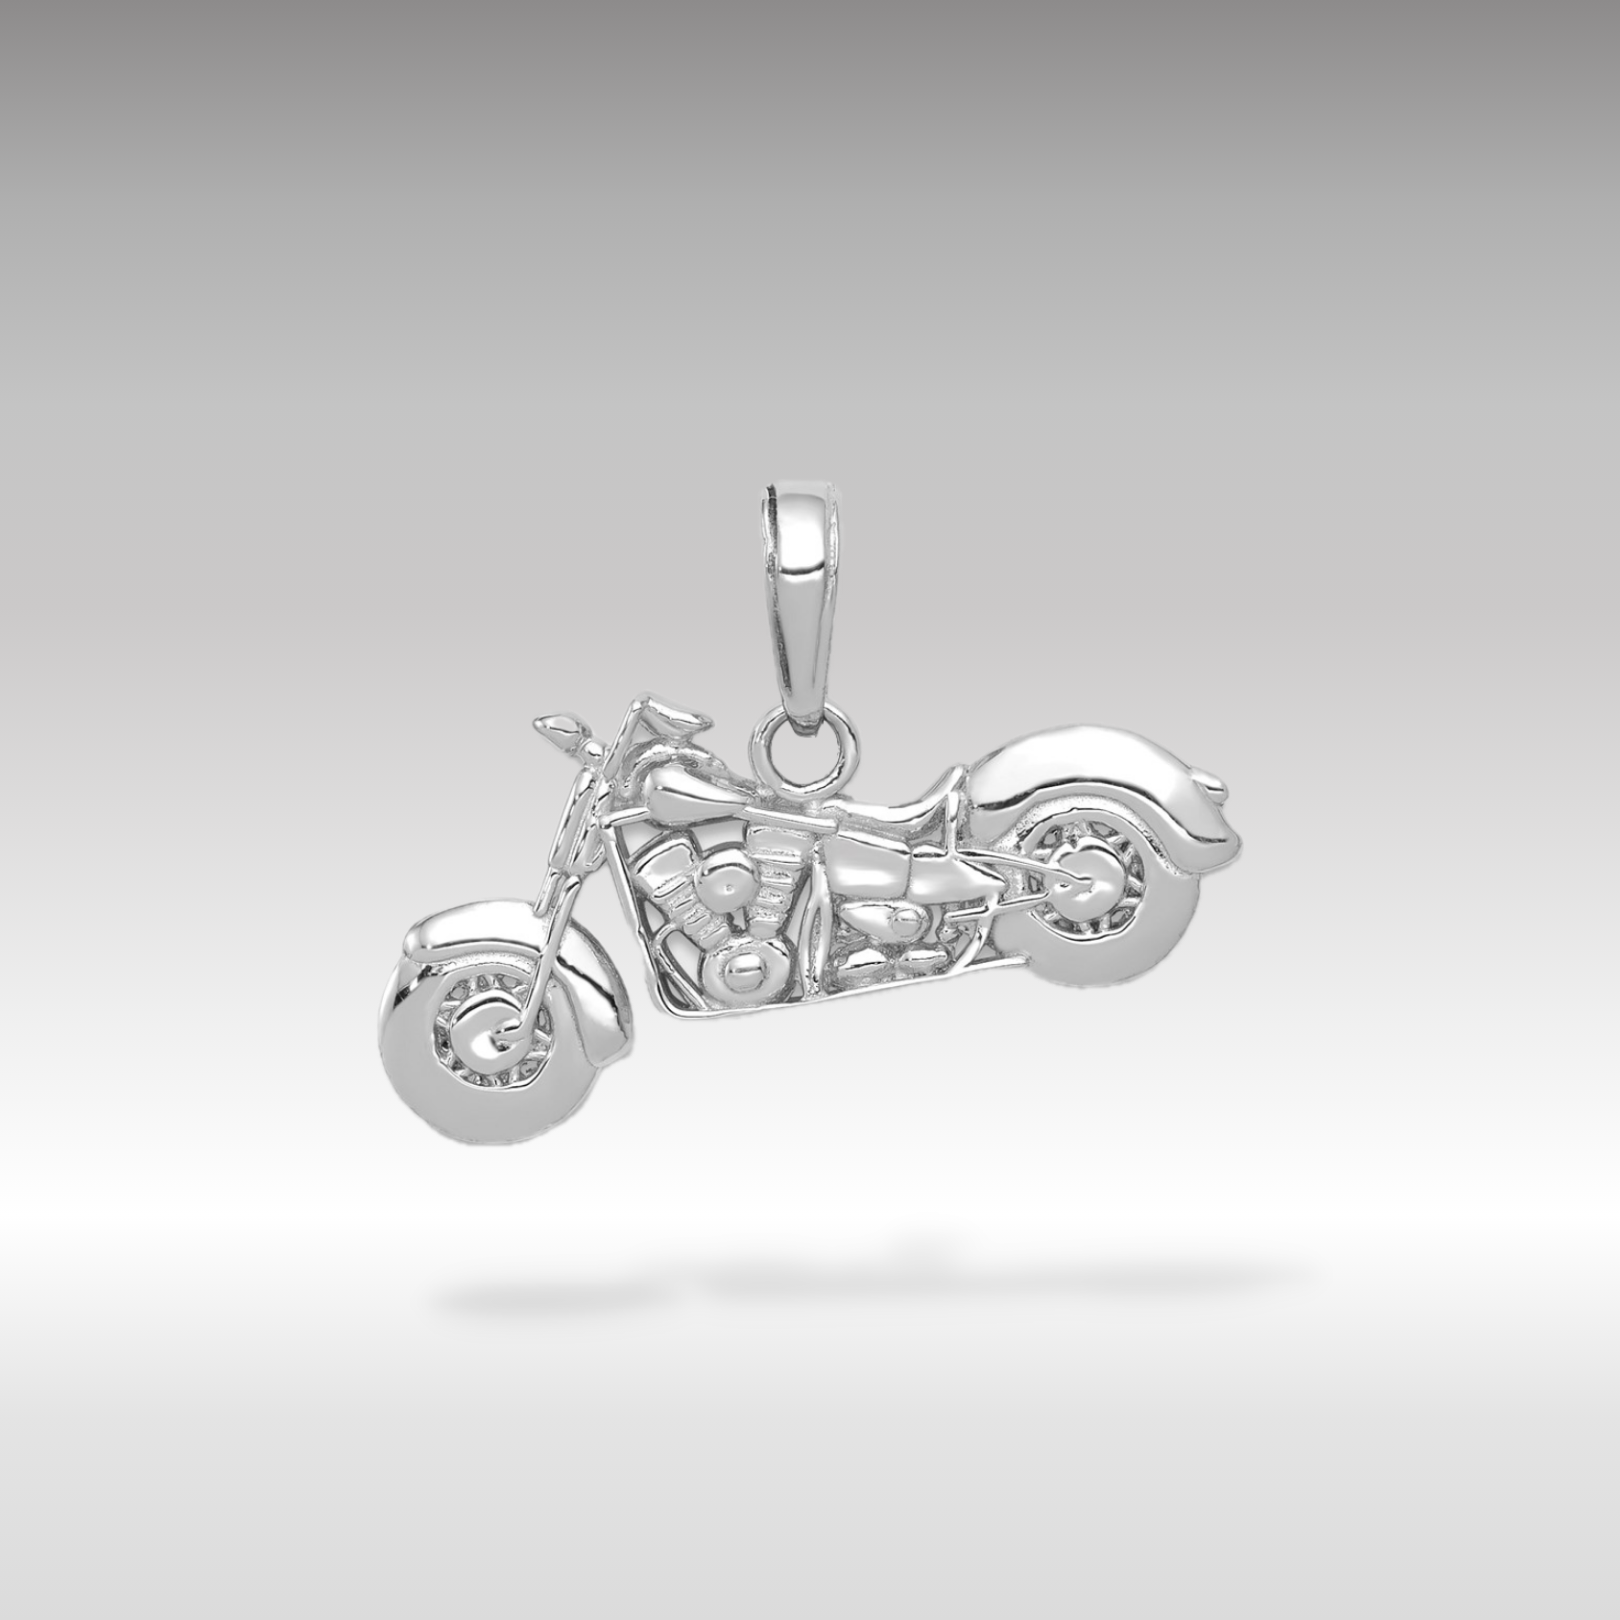 14K White Gold 3D Motorcycle Pendant - Charlie & Co. Jewelry